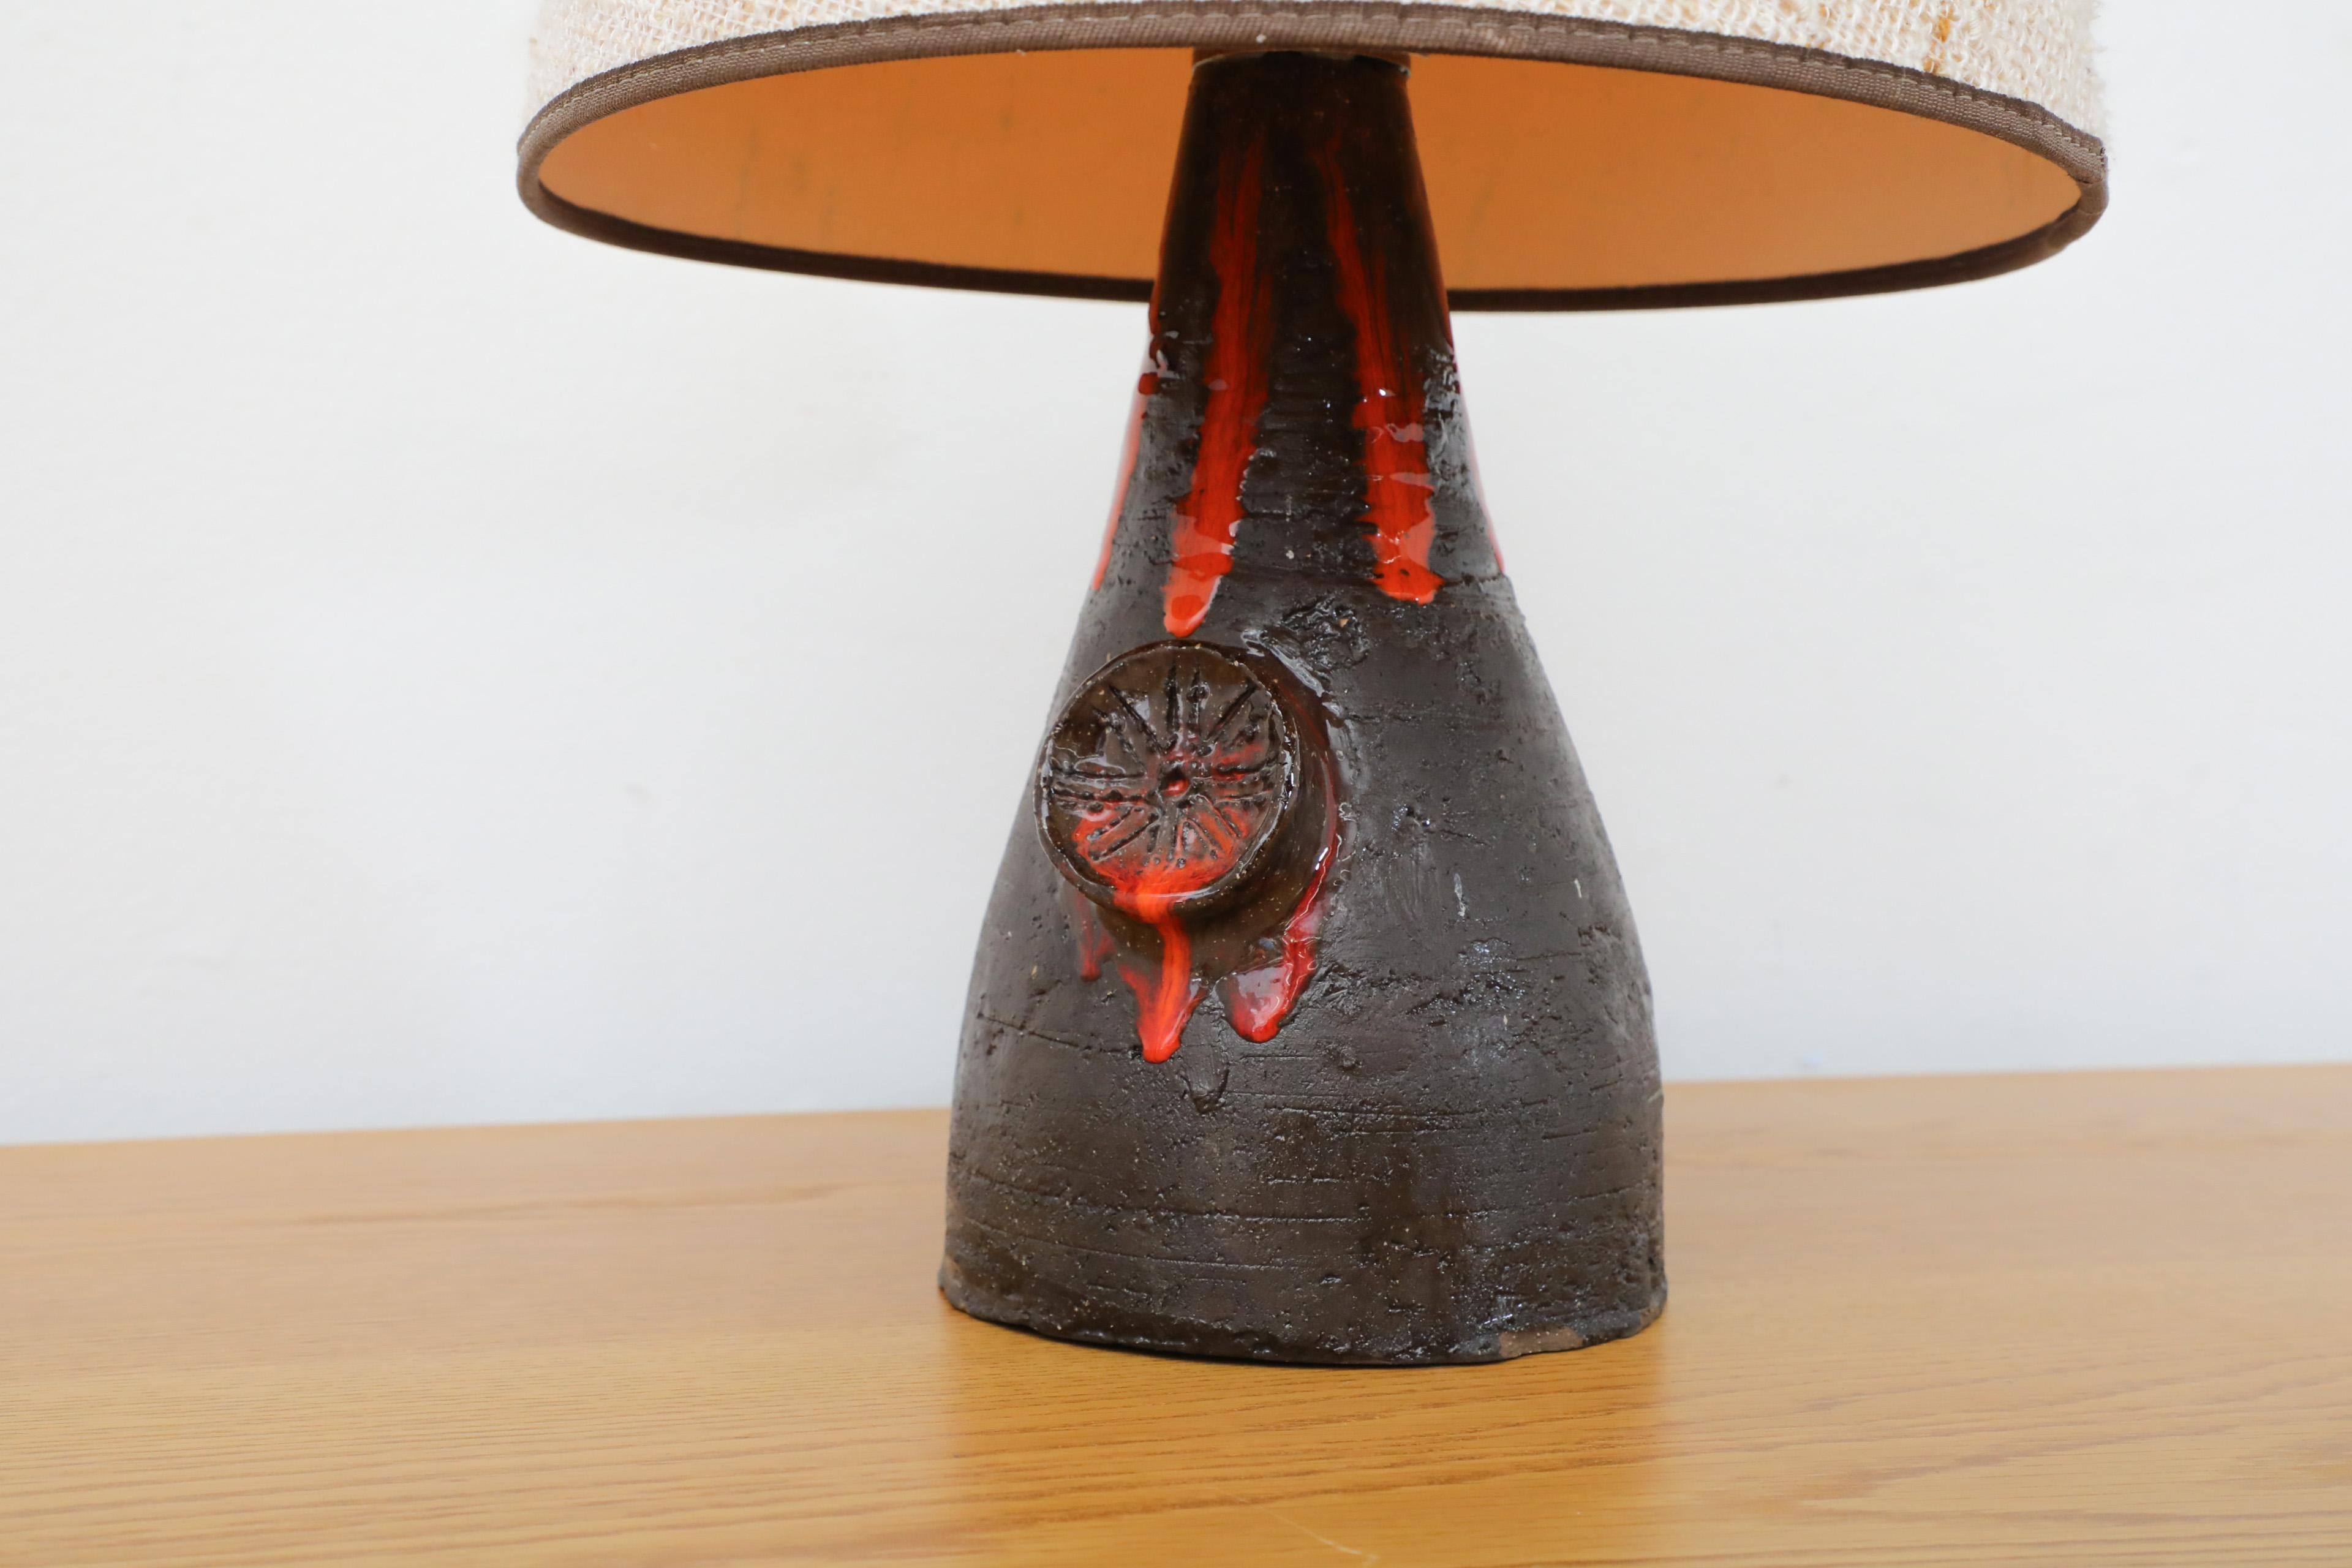 Dutch Mid-Century Black Ceramic Volcanic Table Lamp w/ Red Dripping Effect Glaze For Sale 1